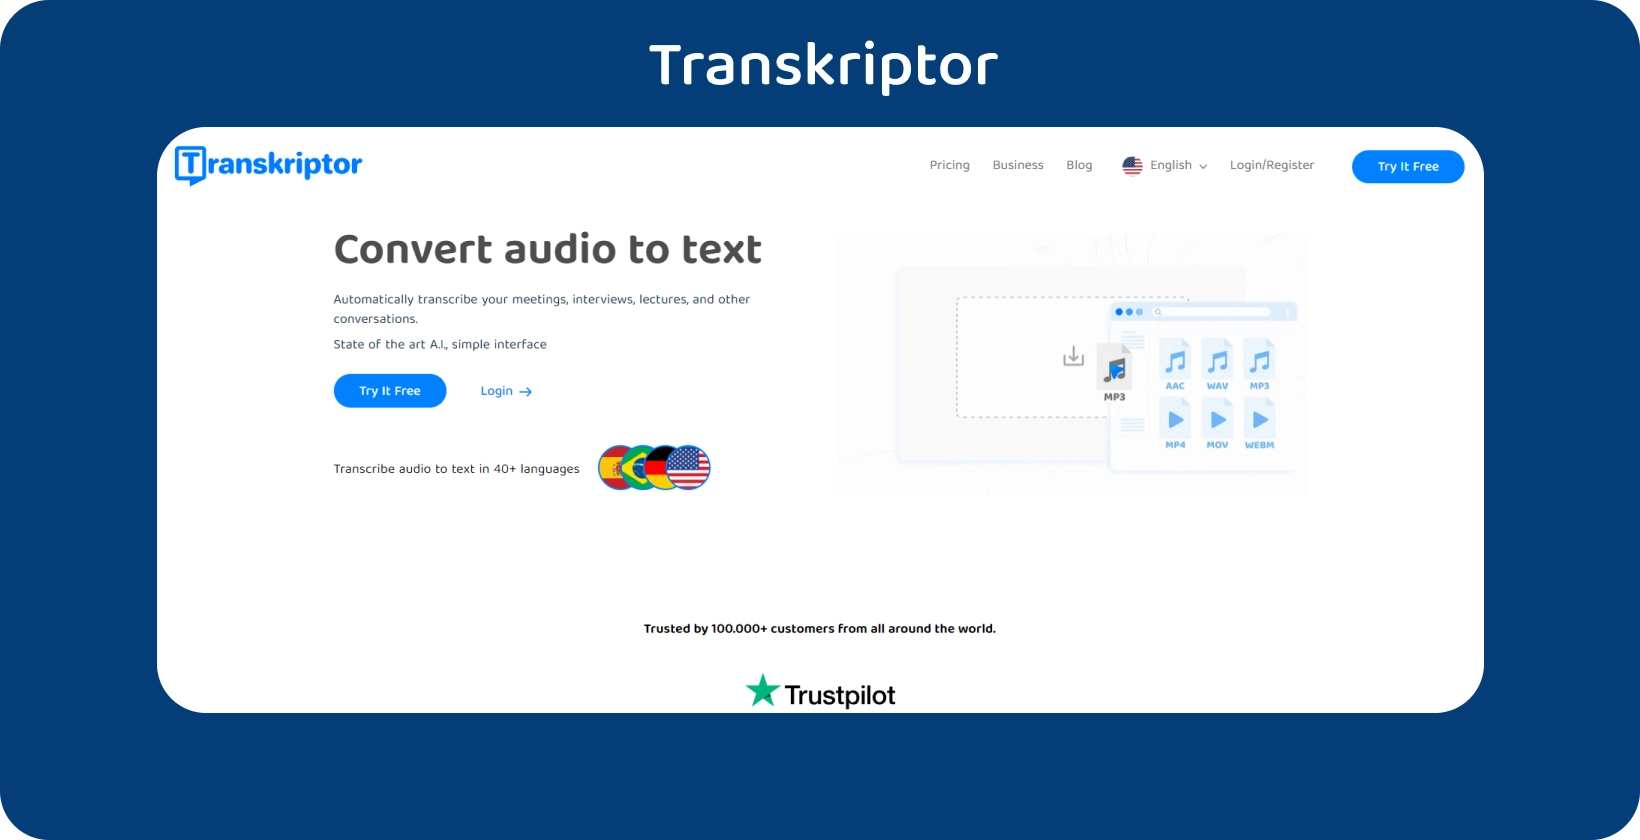 Transkriptor homepage with a clear call to action, offering audio to text transcription services.